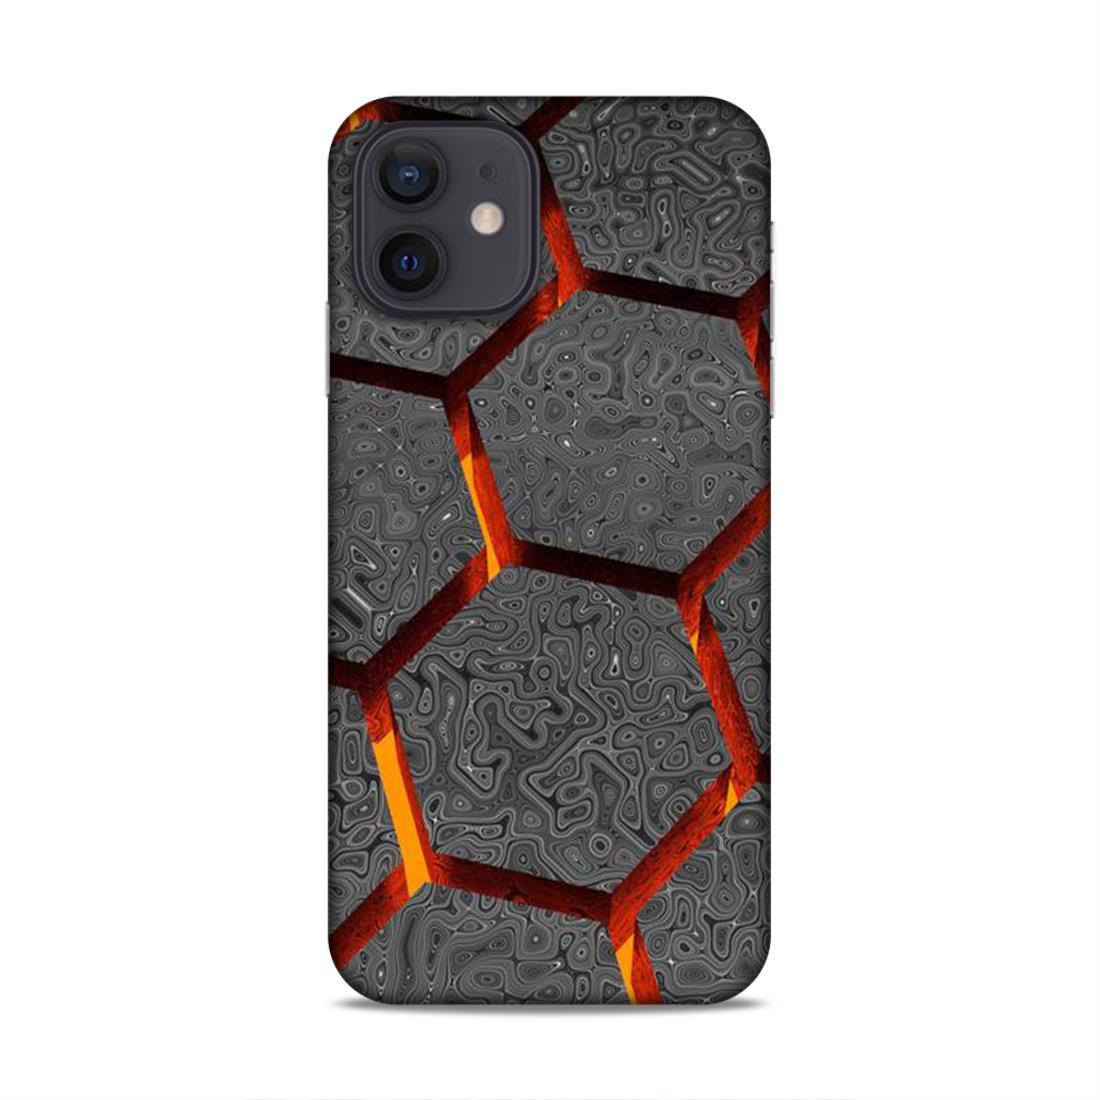 Hexagon Pattern iPhone 12 Phone Case Cover